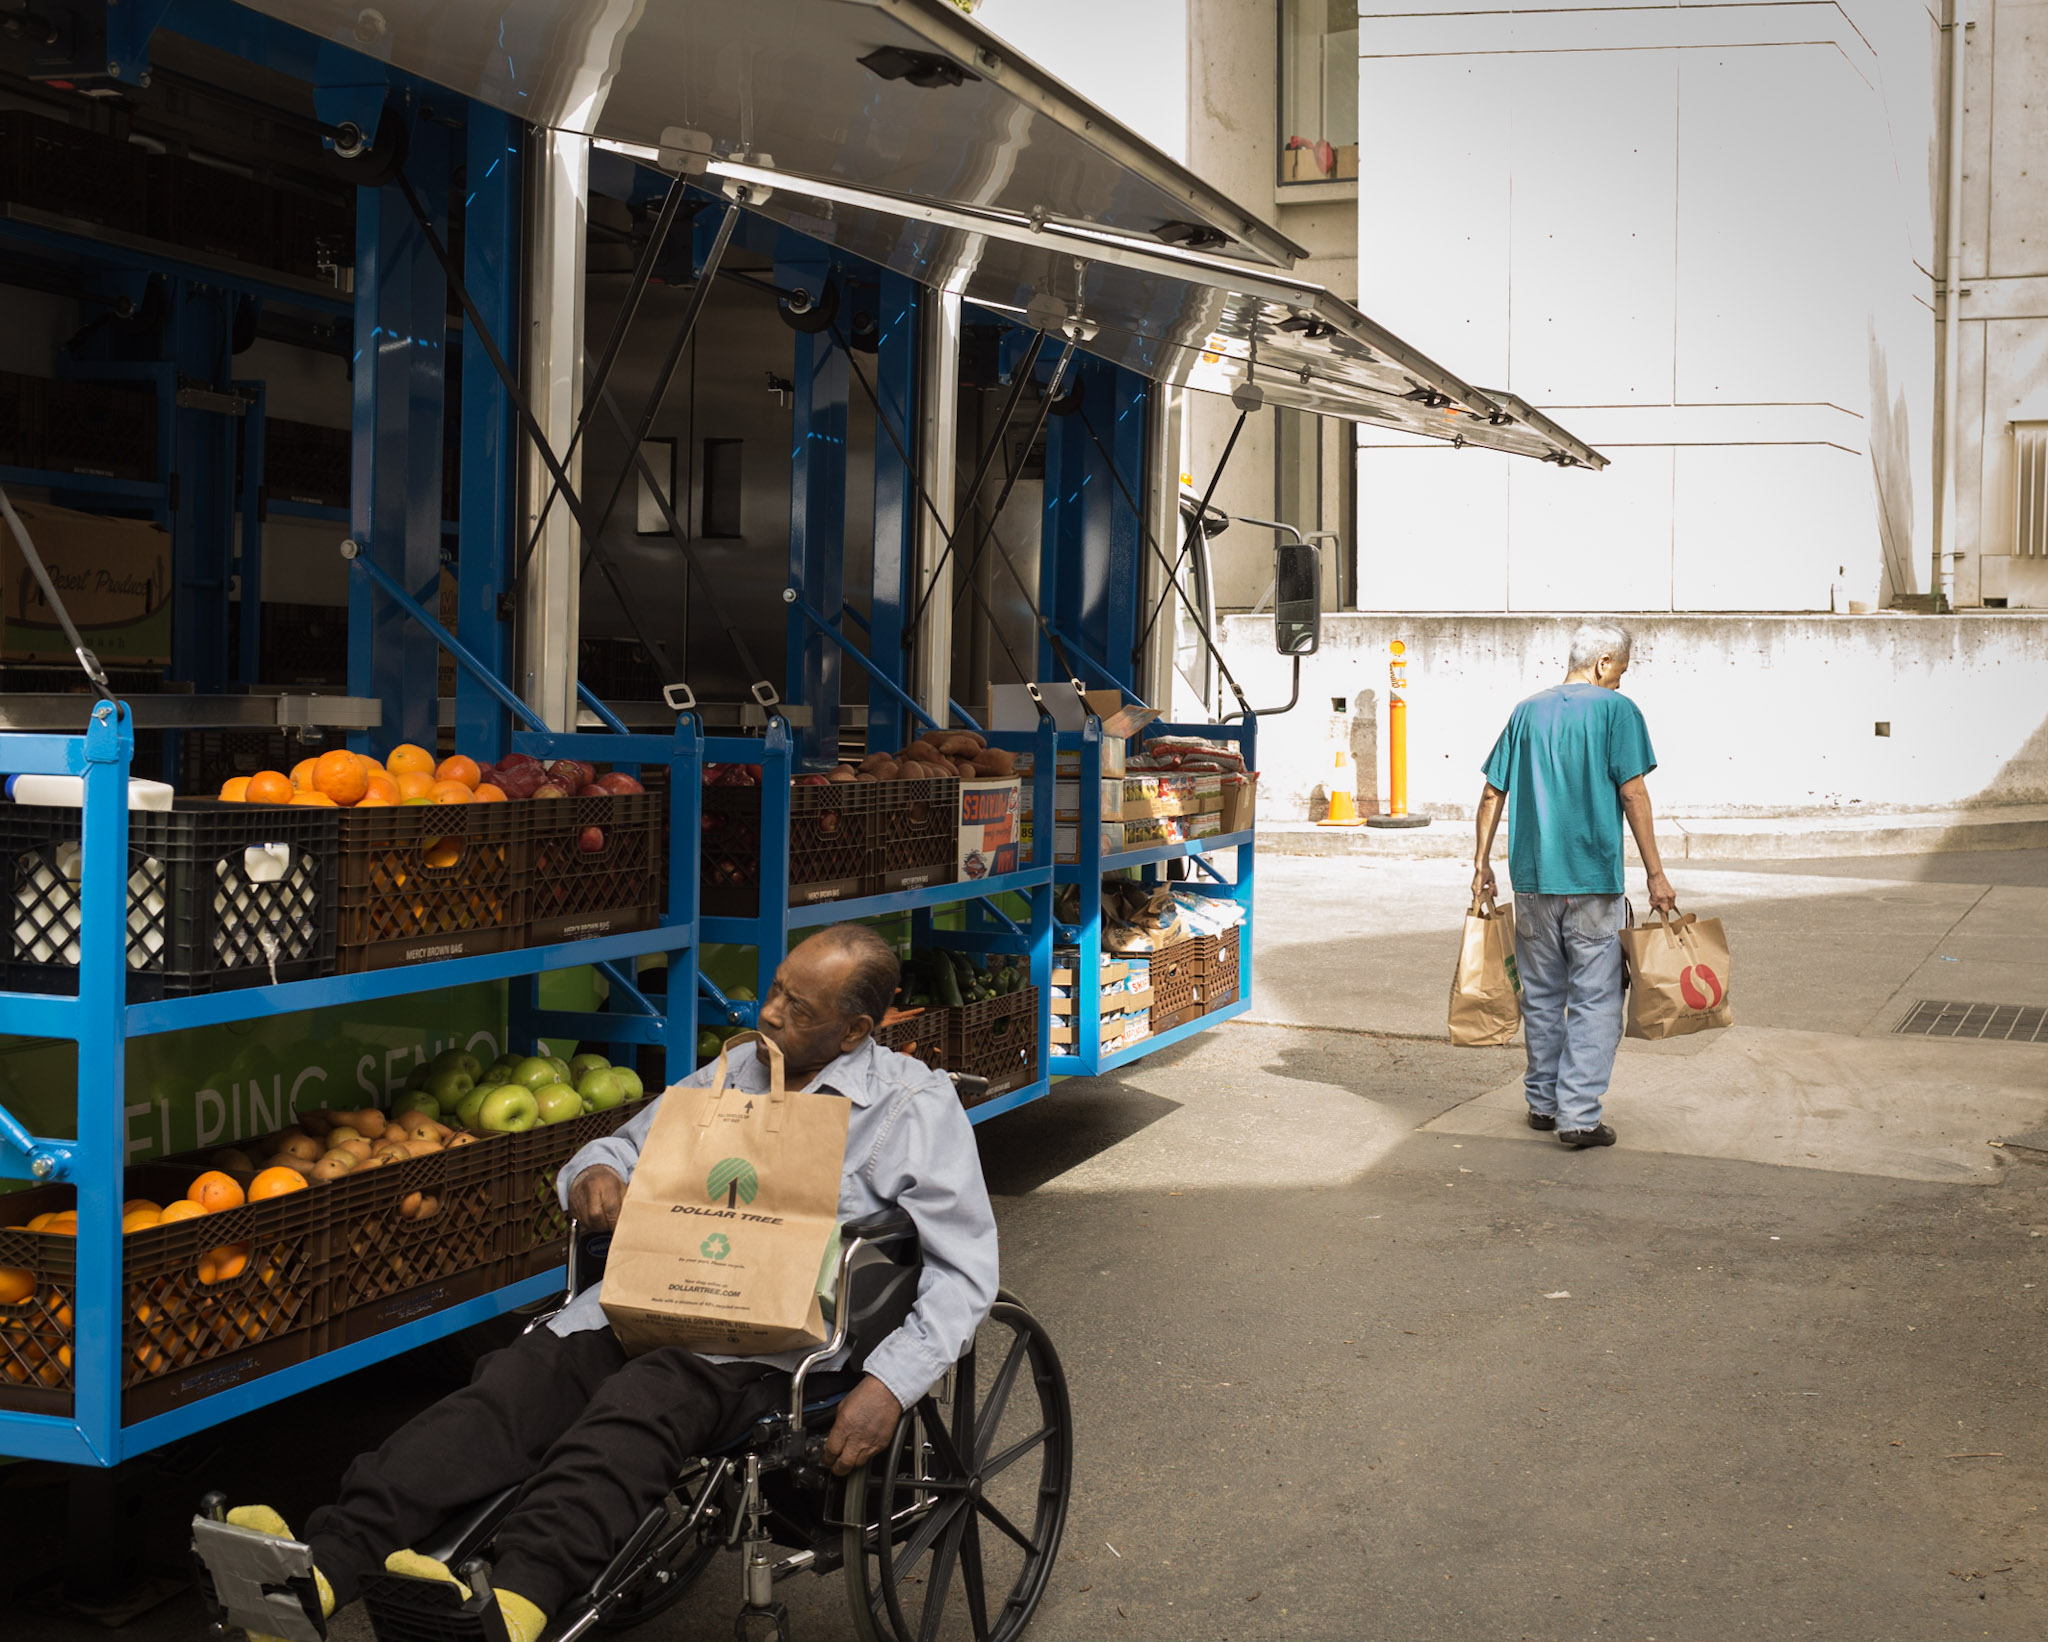 Seniors get groceries at the mobile grocery truck